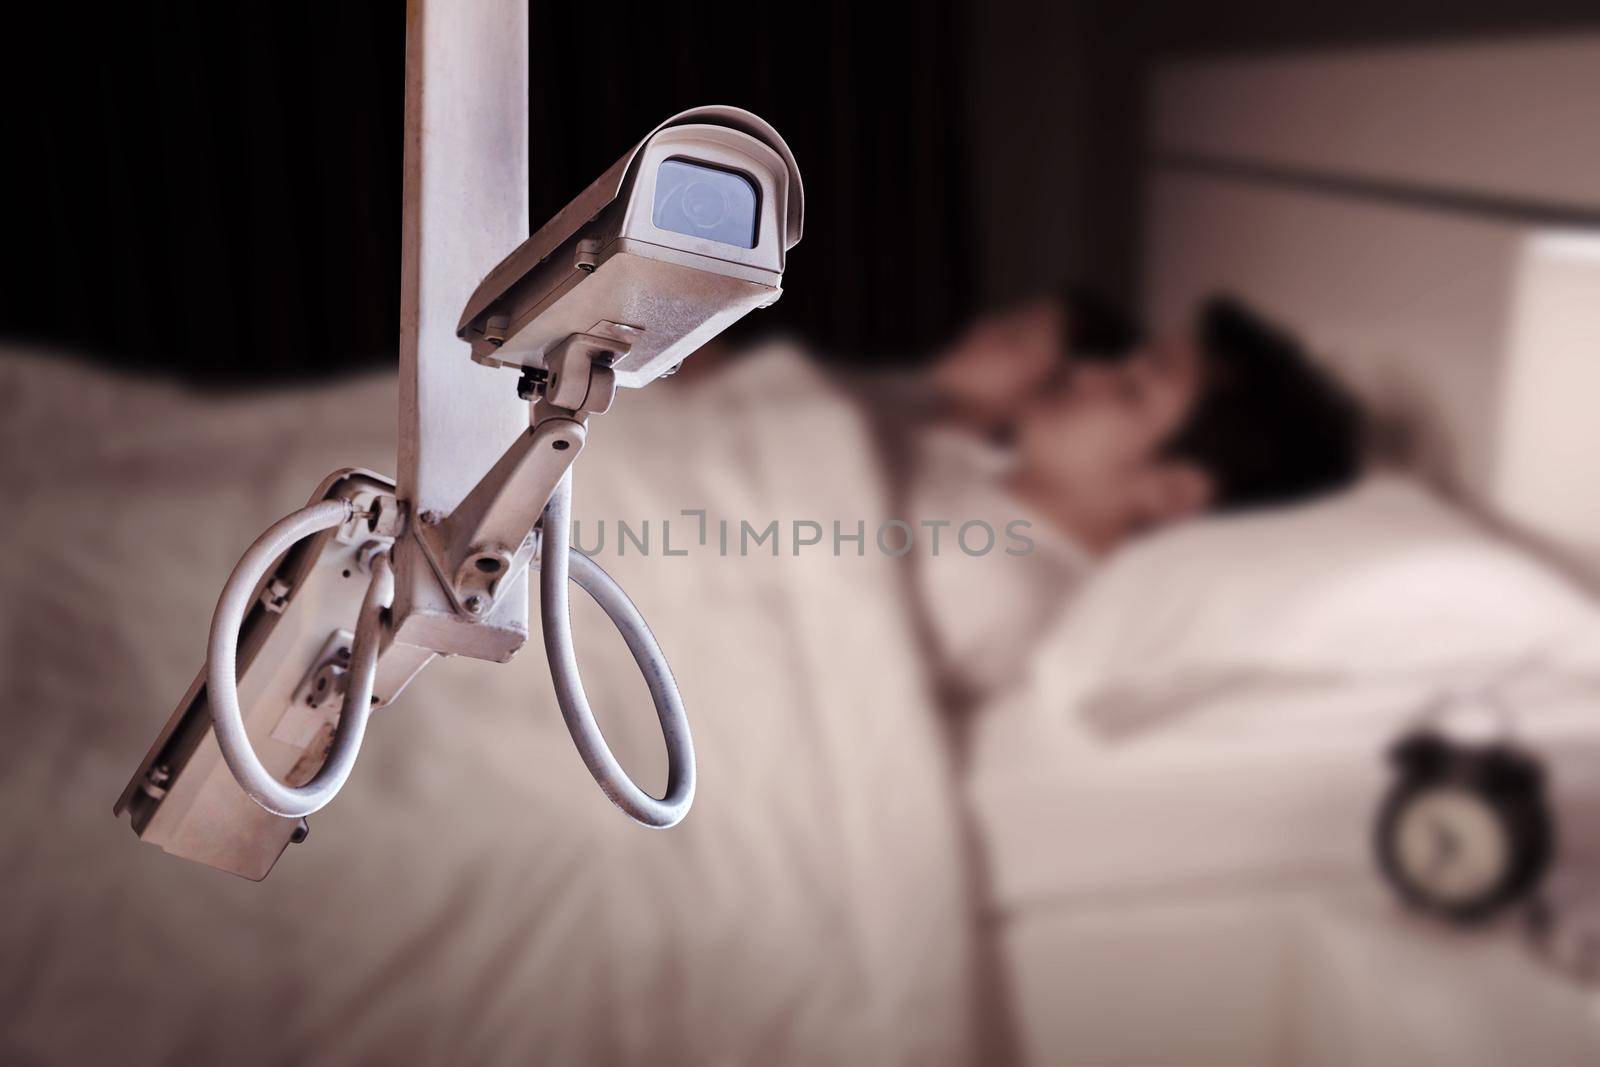 CCTV Camera or surveillance operating with couple sleeping in bedroom